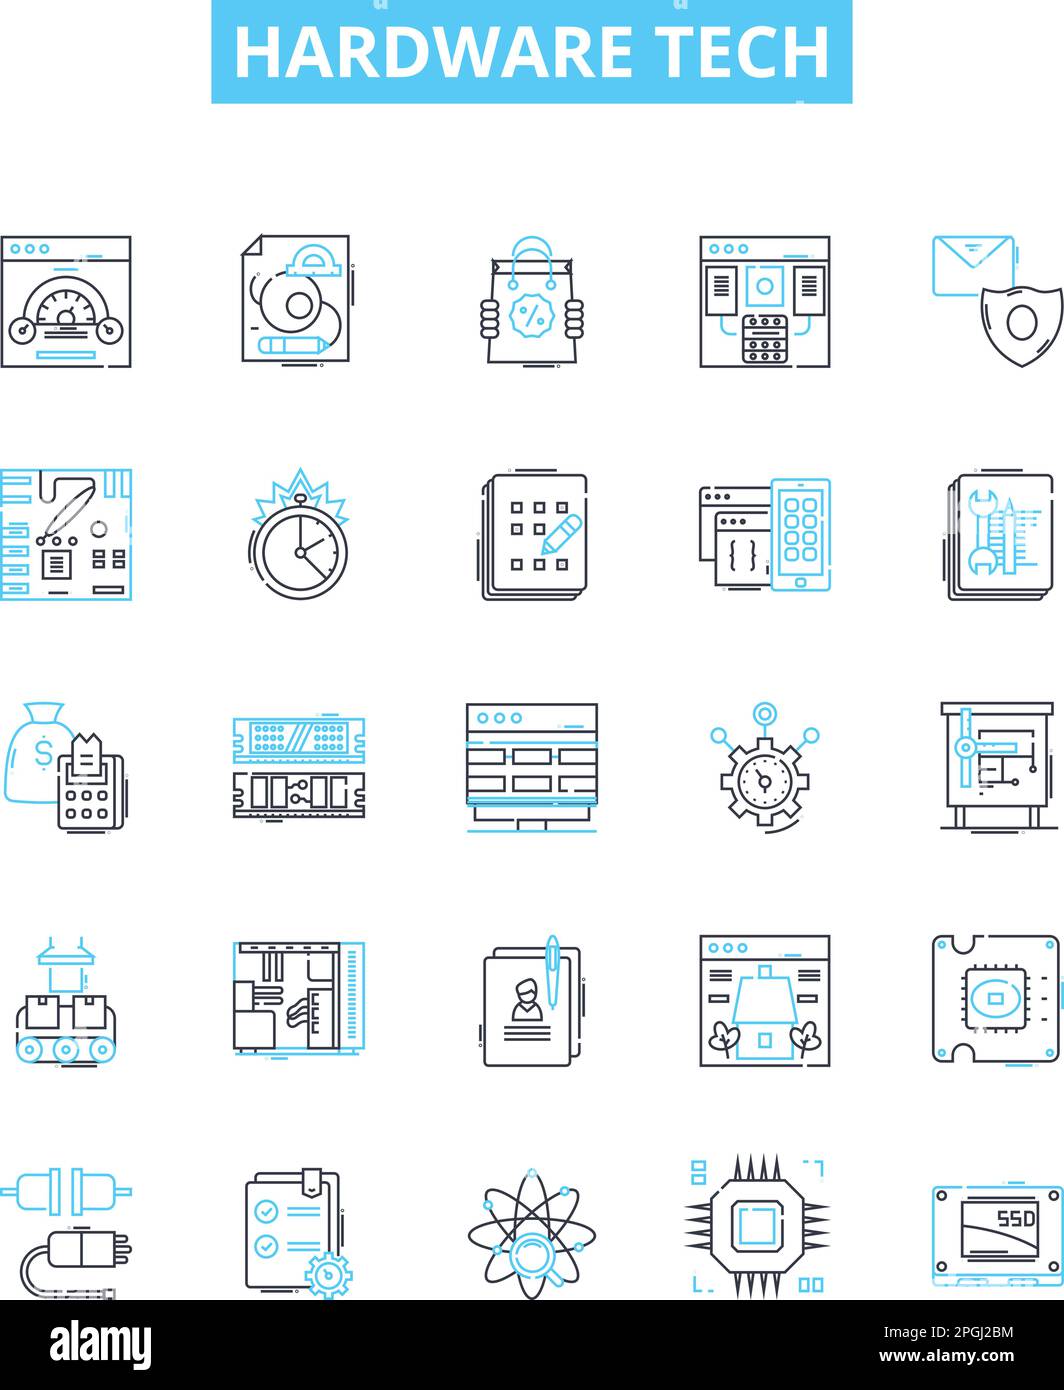 hardware tech vector line icons set. Hardware, Technology, Devices, Components, Gadgets, Networking, Network illustration outline concept symbols and Stock Vector